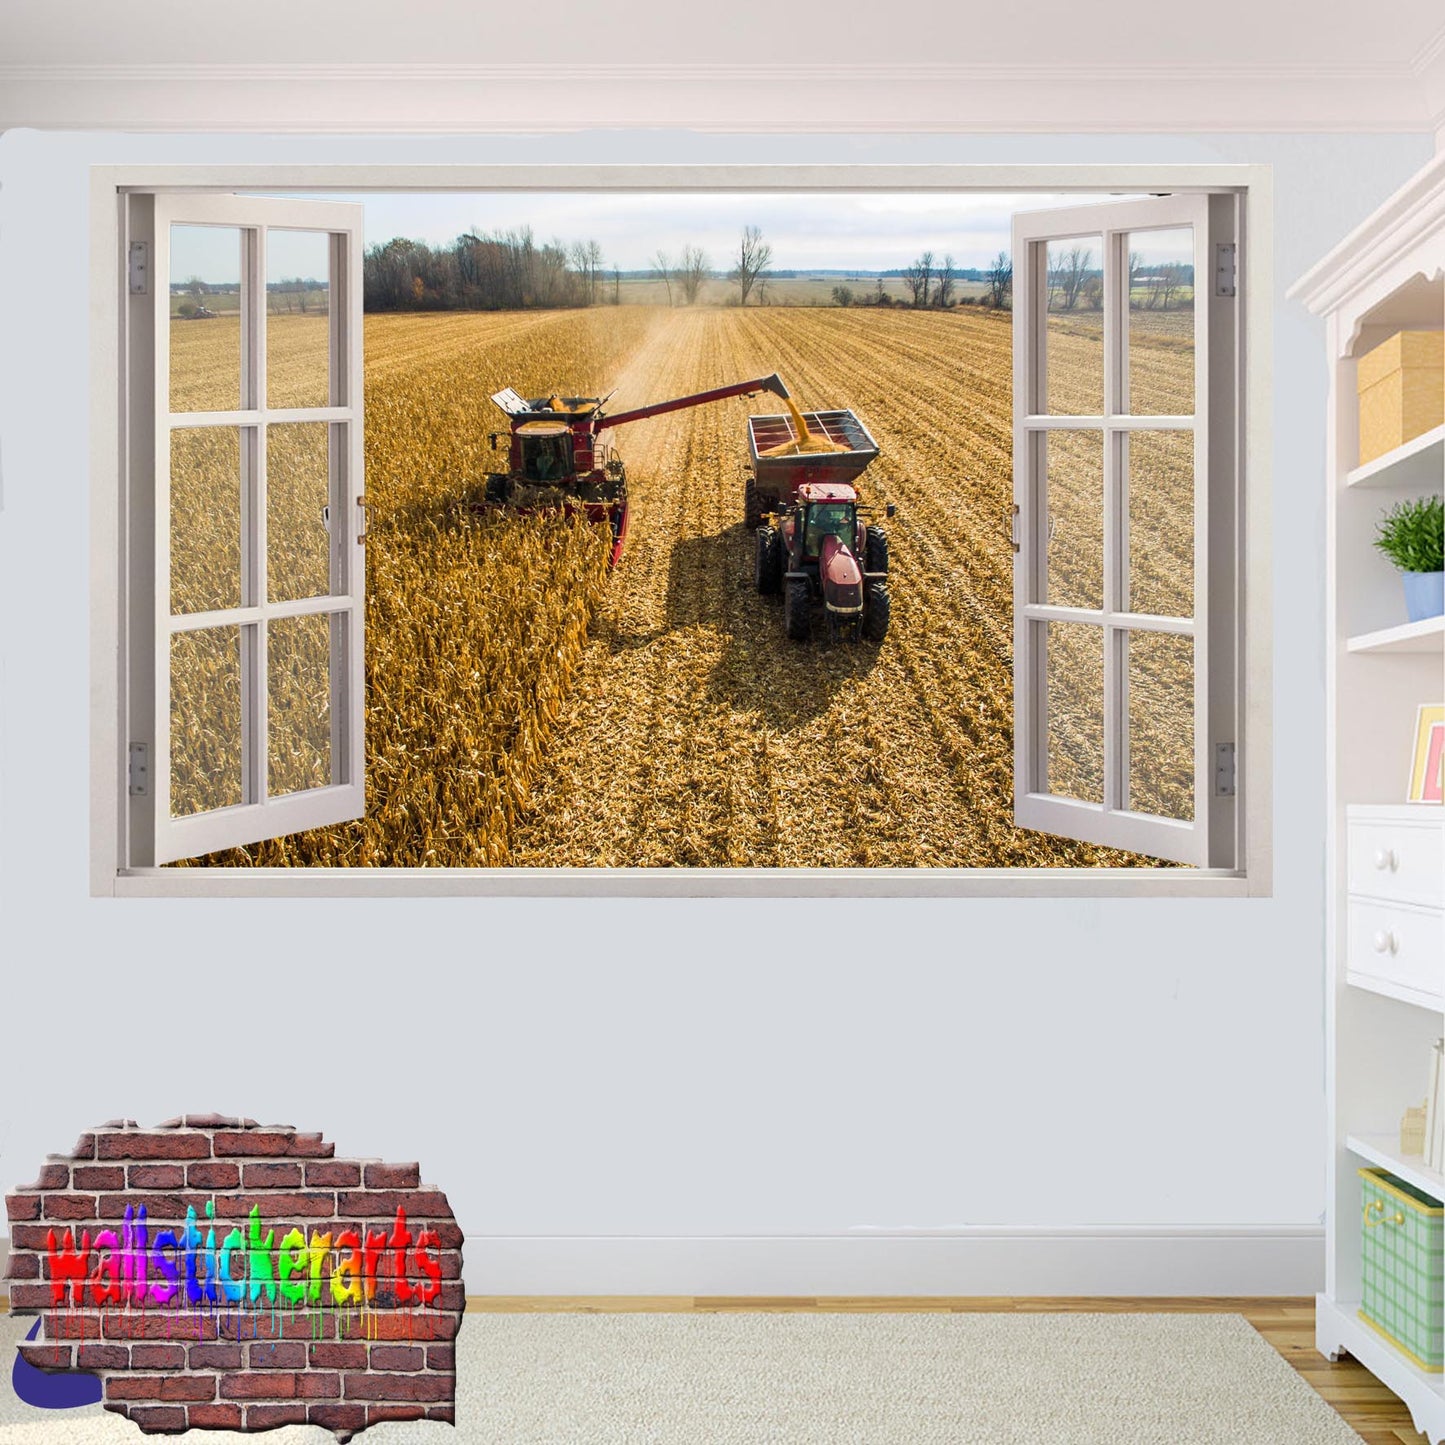 TRACTOR AND COMBINE HARVESTER AGRICULTURAL FARMING TOOLS POSTER WALL STICKER